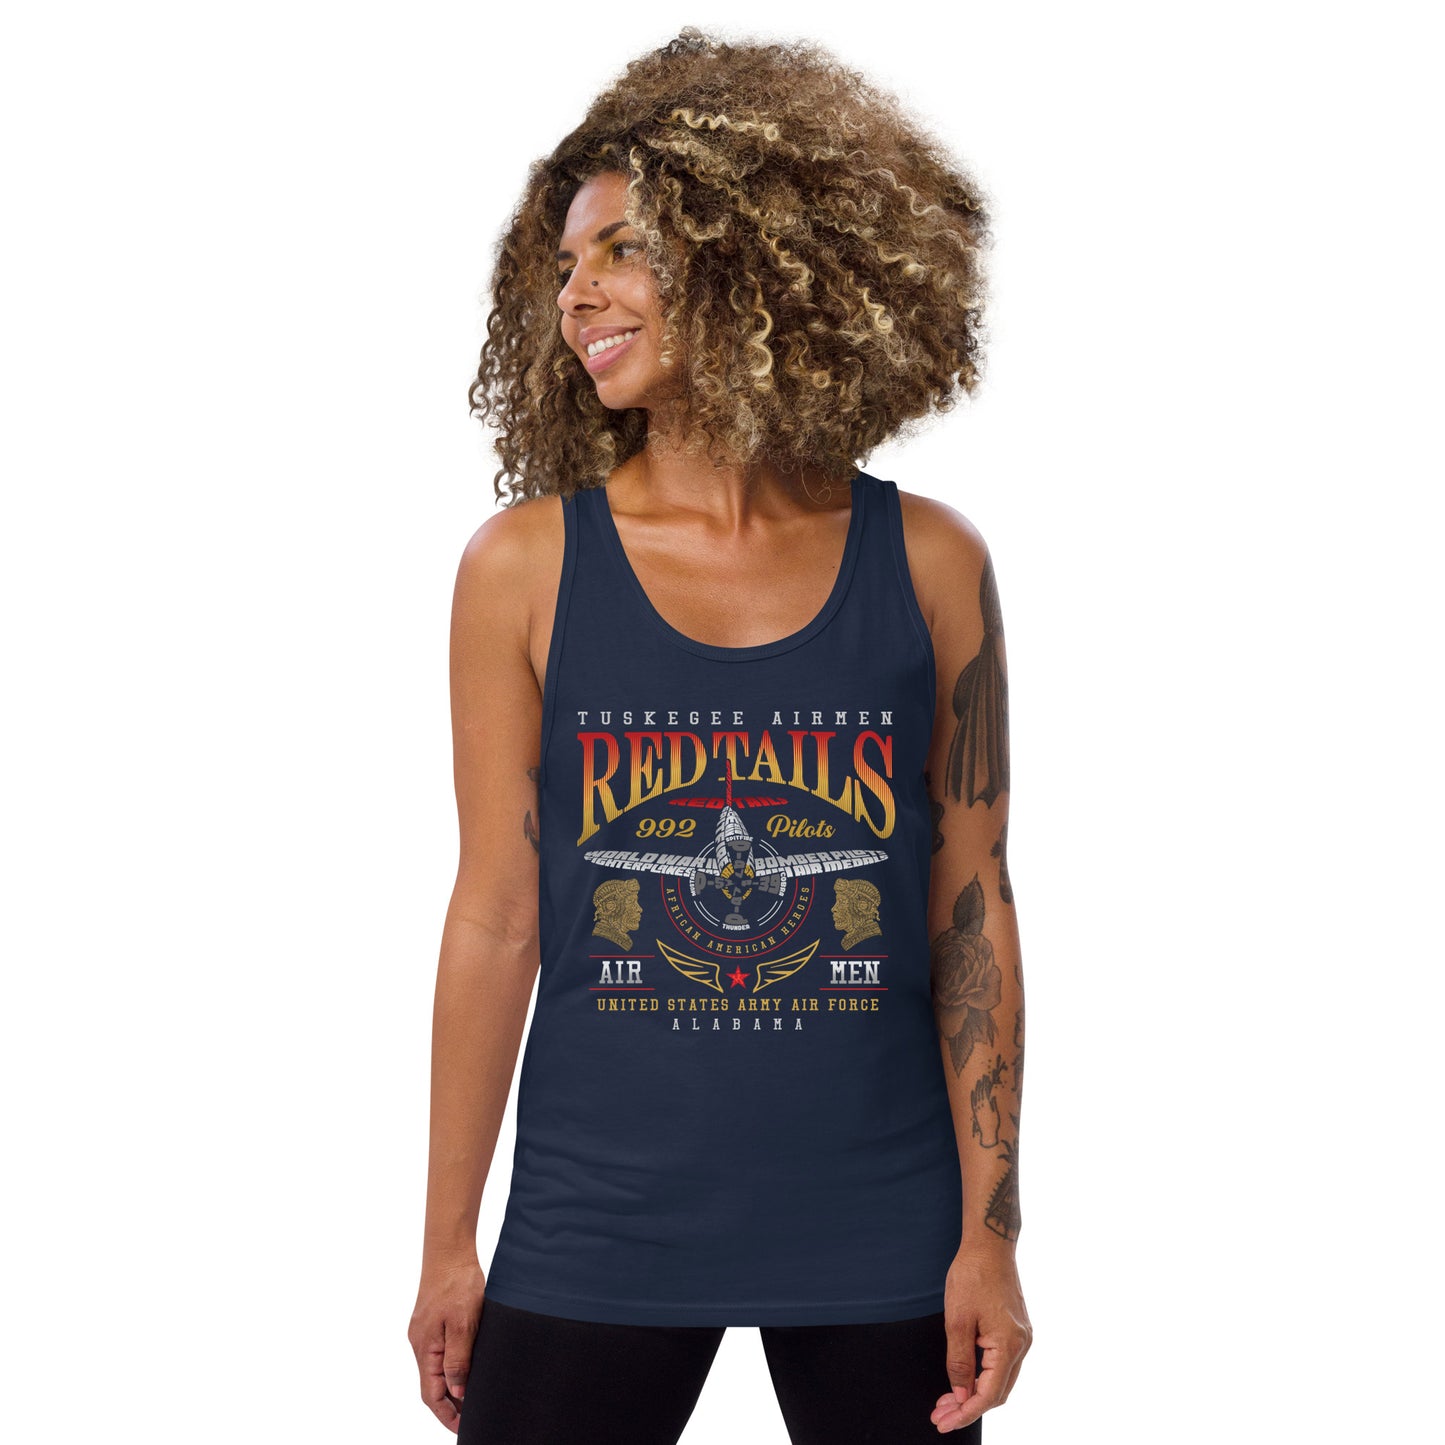 Tuskegee Airmen Red Tails Graphic on Unisex Tank Top